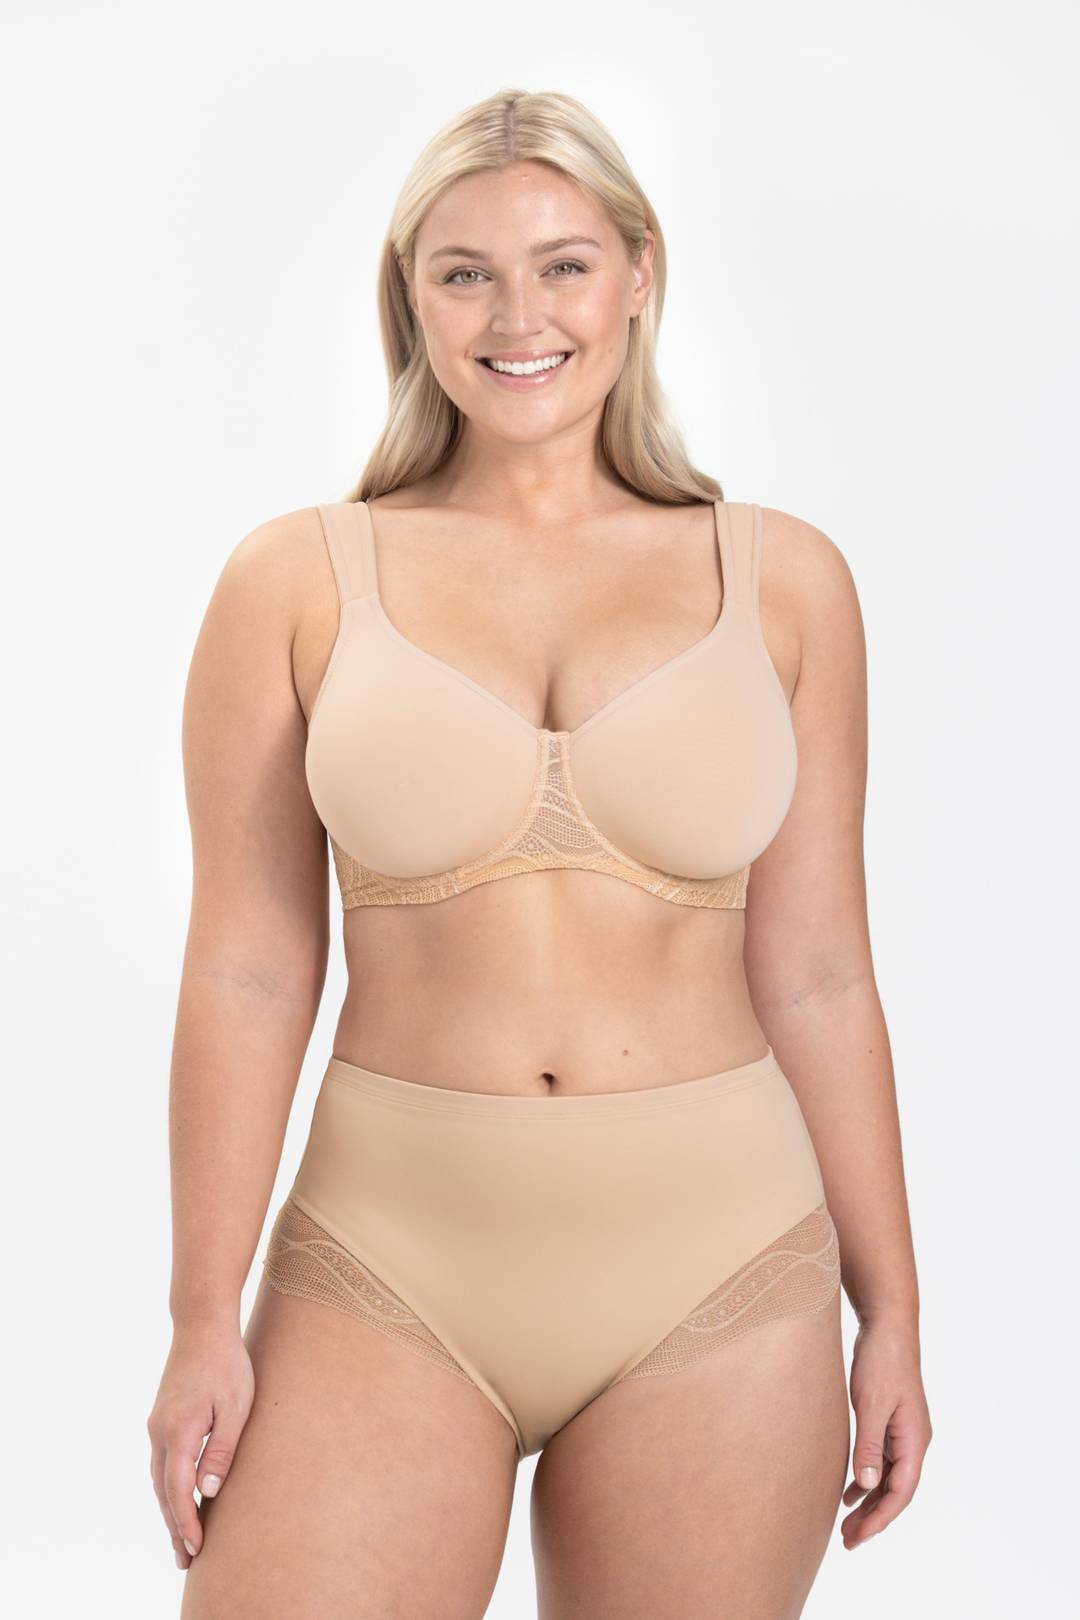 Smart shape bra - provides support and shape around the bust - Miss Mary